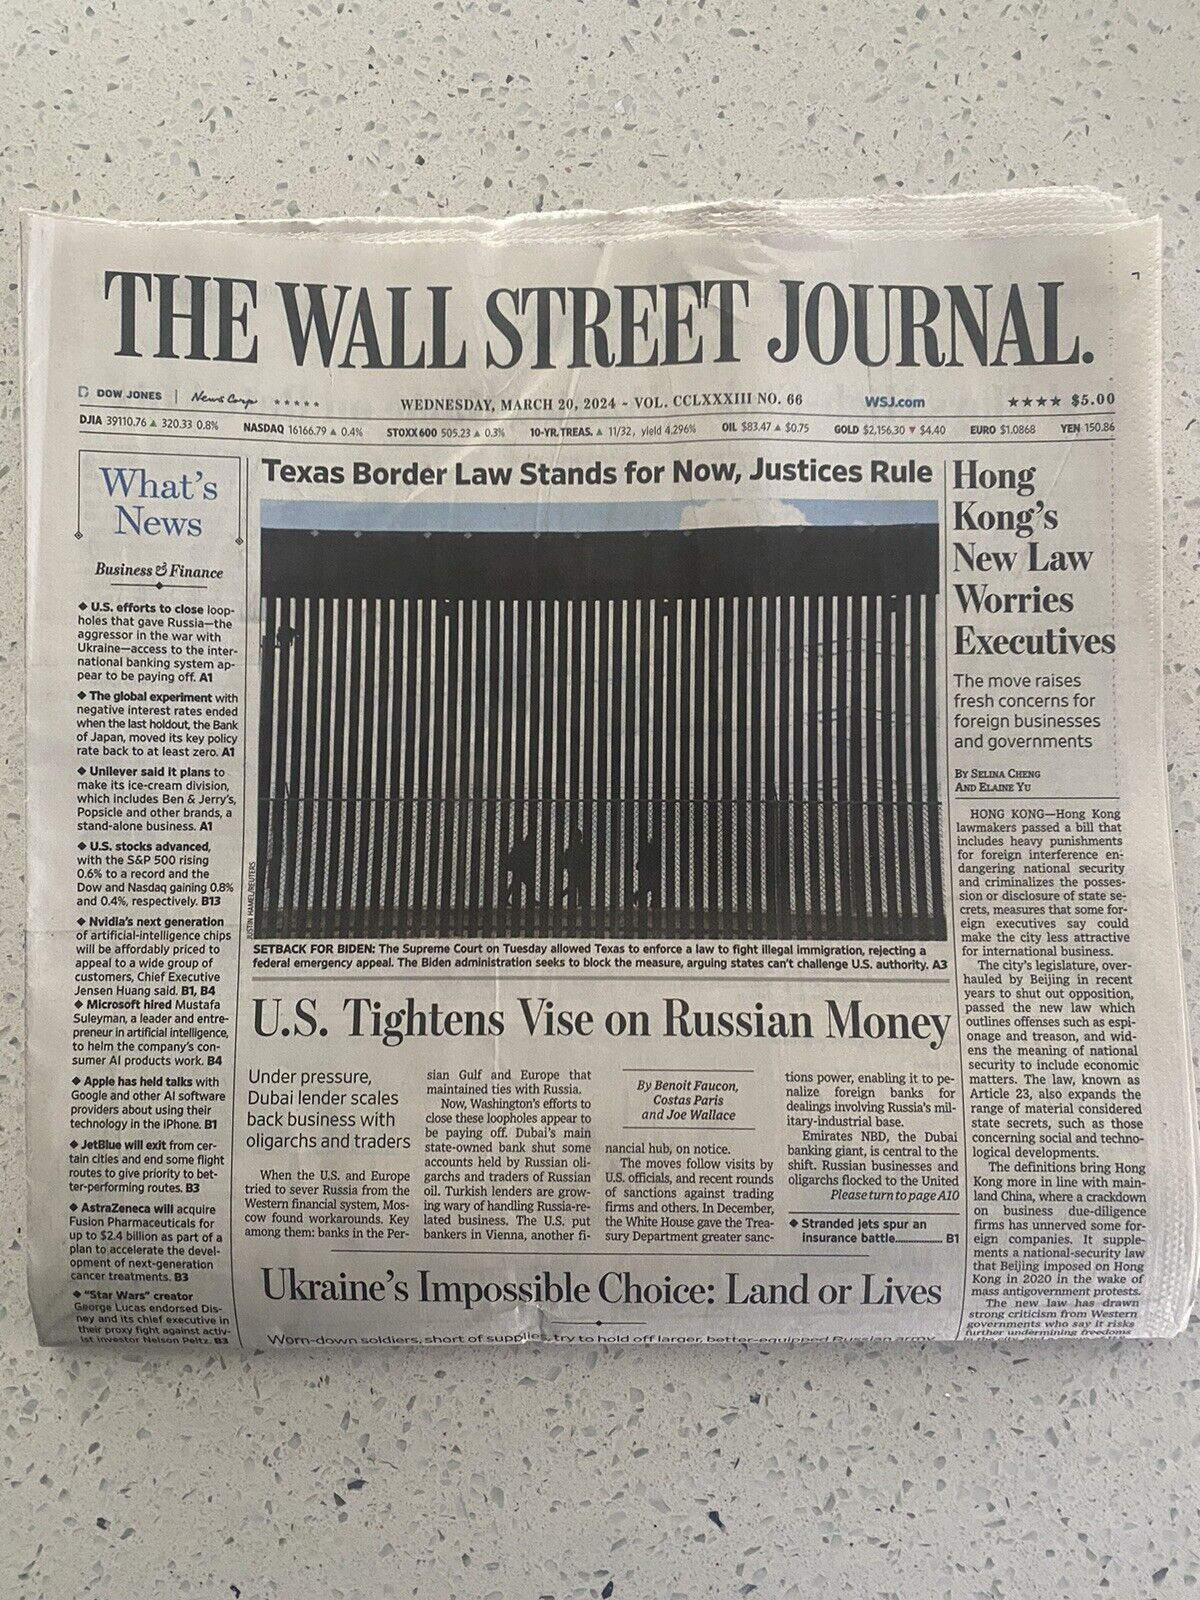 The Wall Street Journal Wednesday, March 20, 2024 Complete Print Newspaper (NEW)